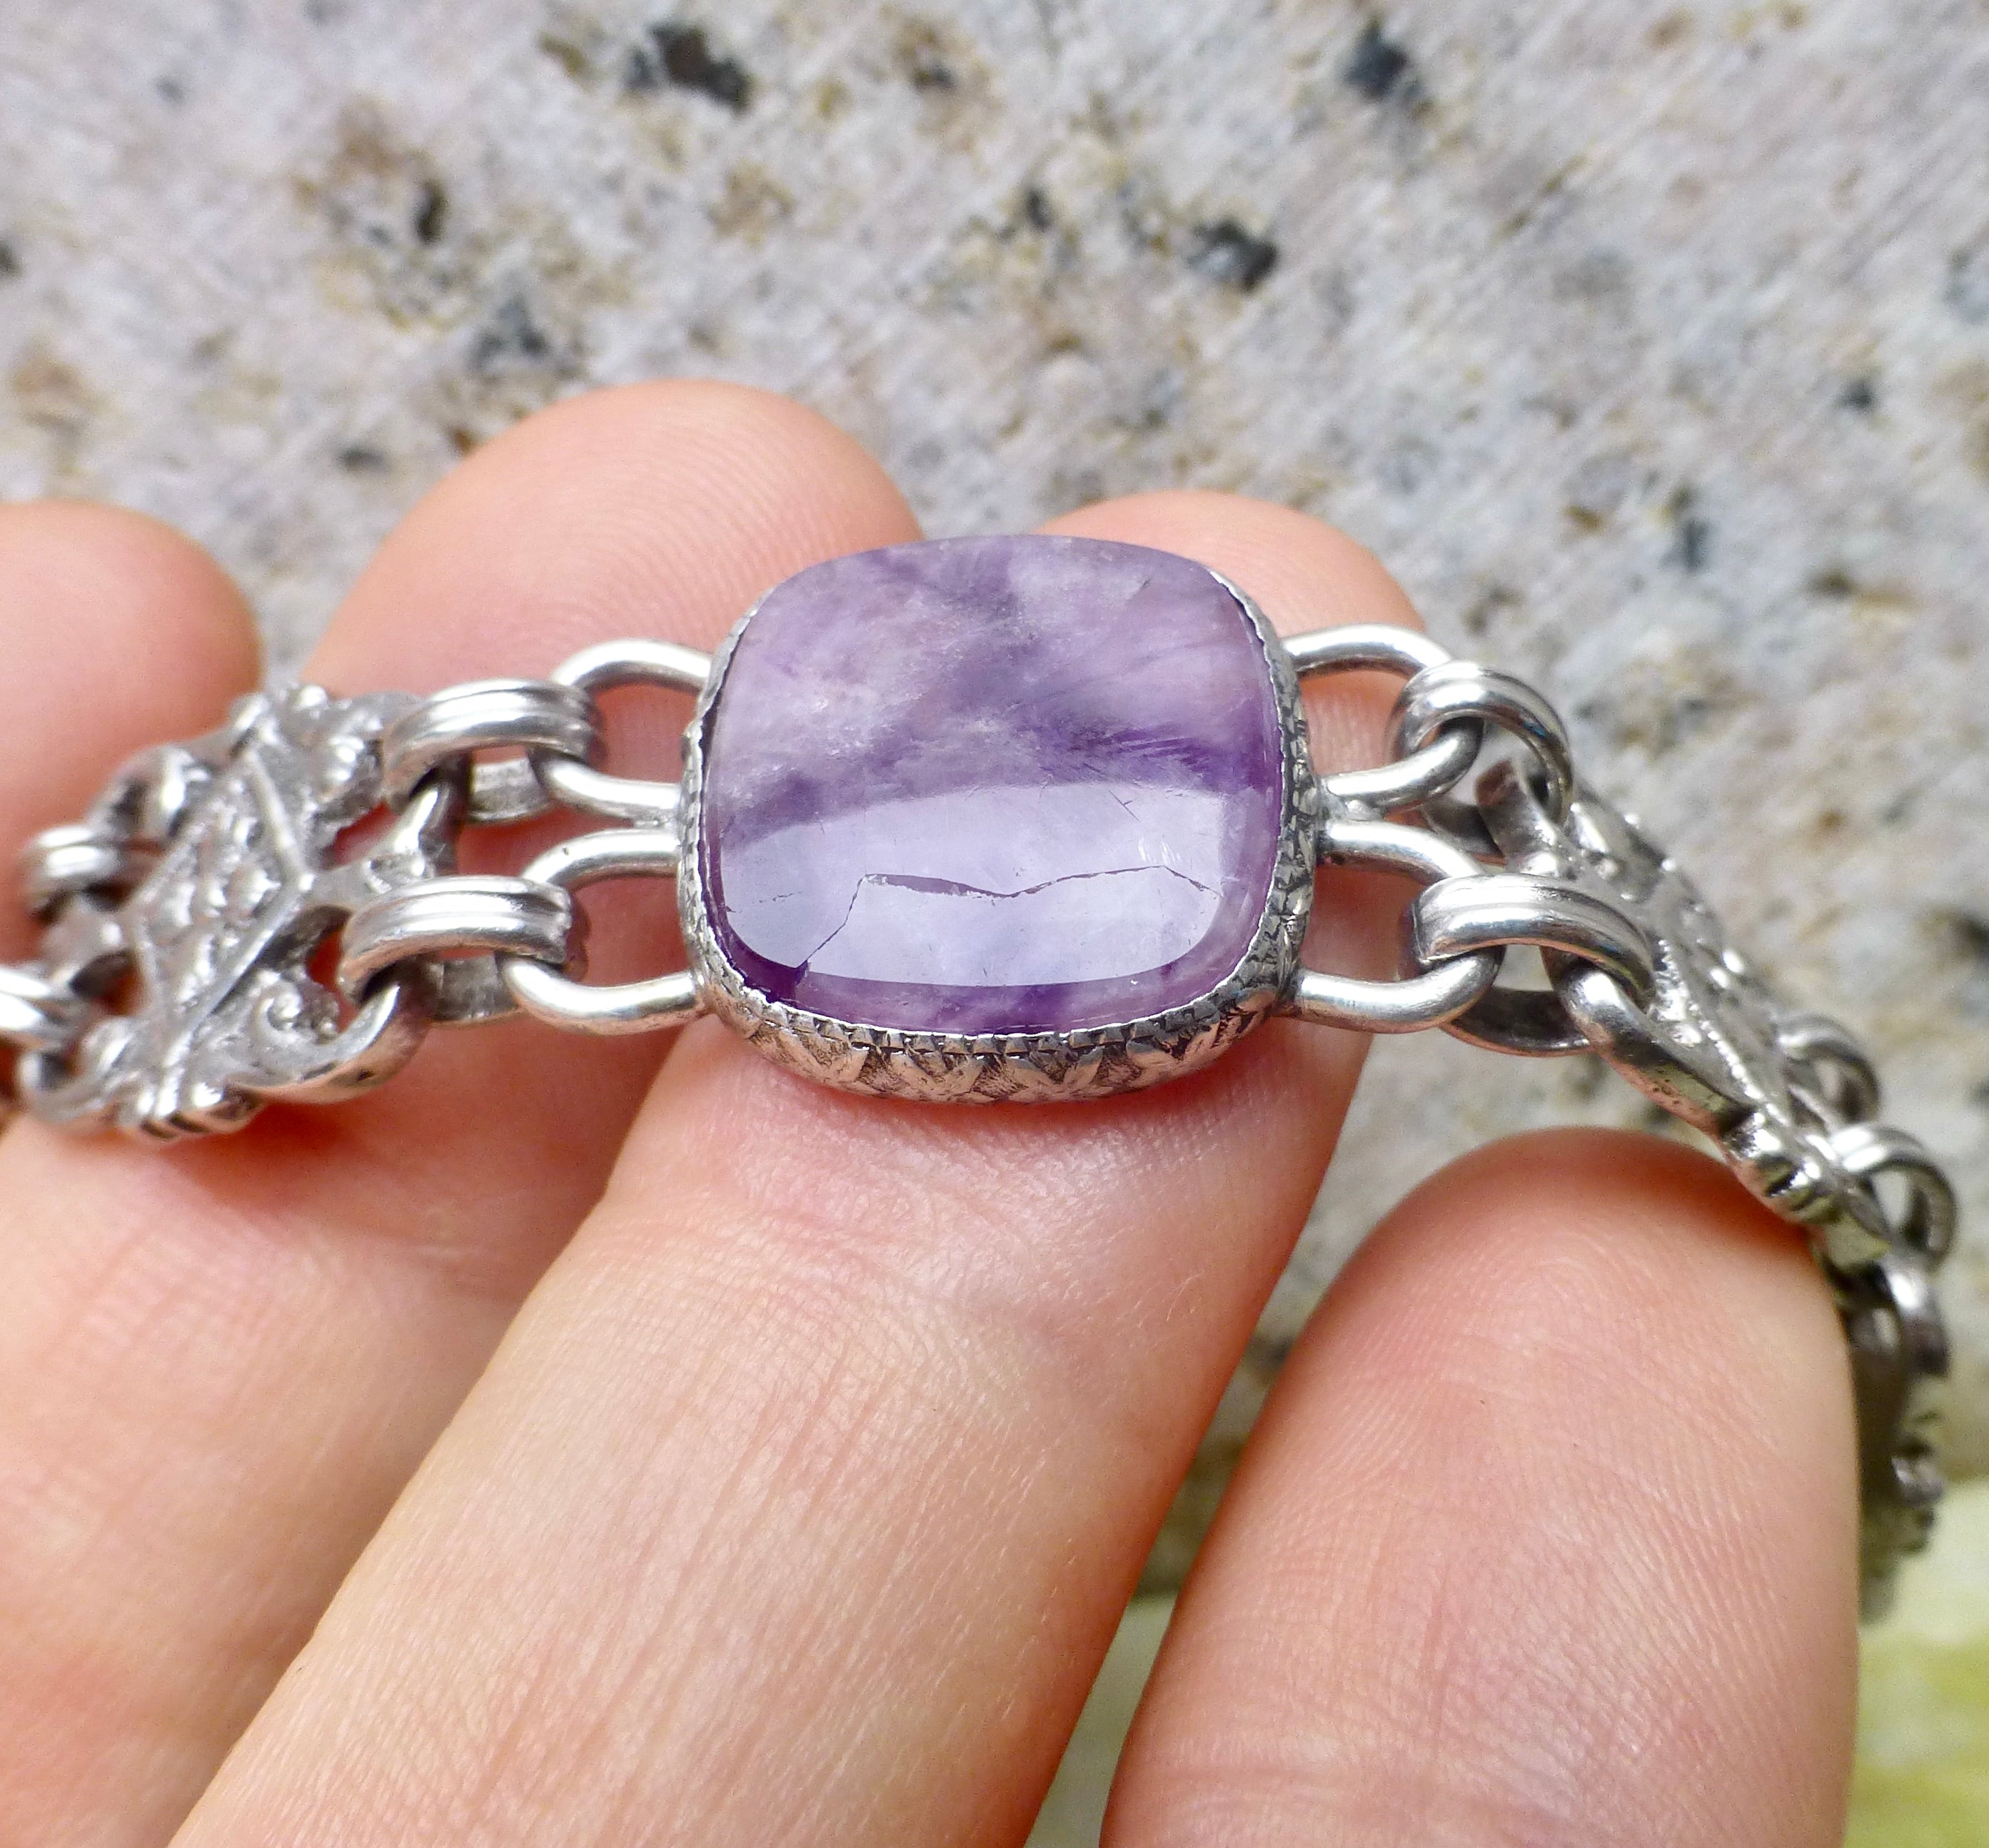 Antique Art Deco Amethyst And Silver Panel Bracelet, Size 7.5 Inches Long